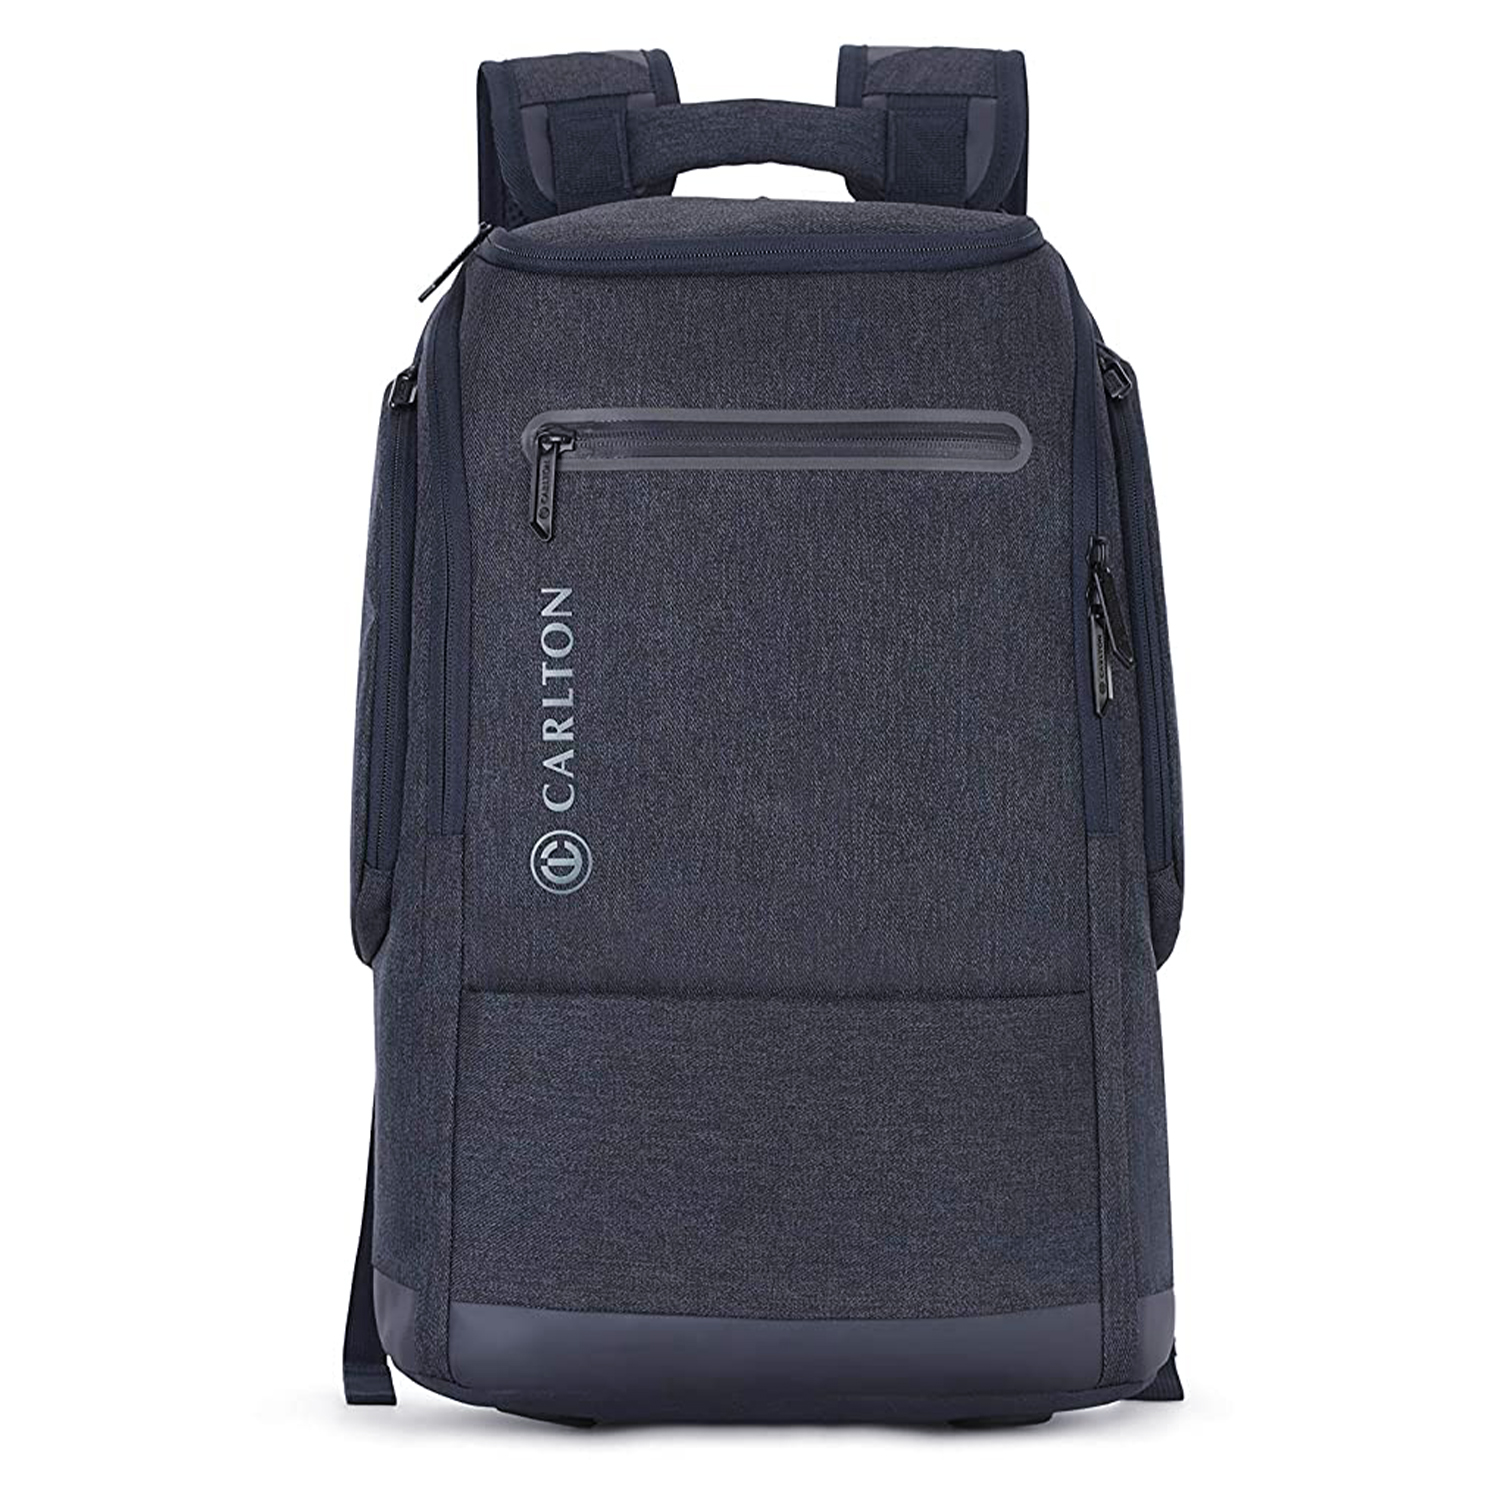 RoshanBags_Carlton Newport 01 26 Ltrs Night Blue Laptop Backpack With Raincover